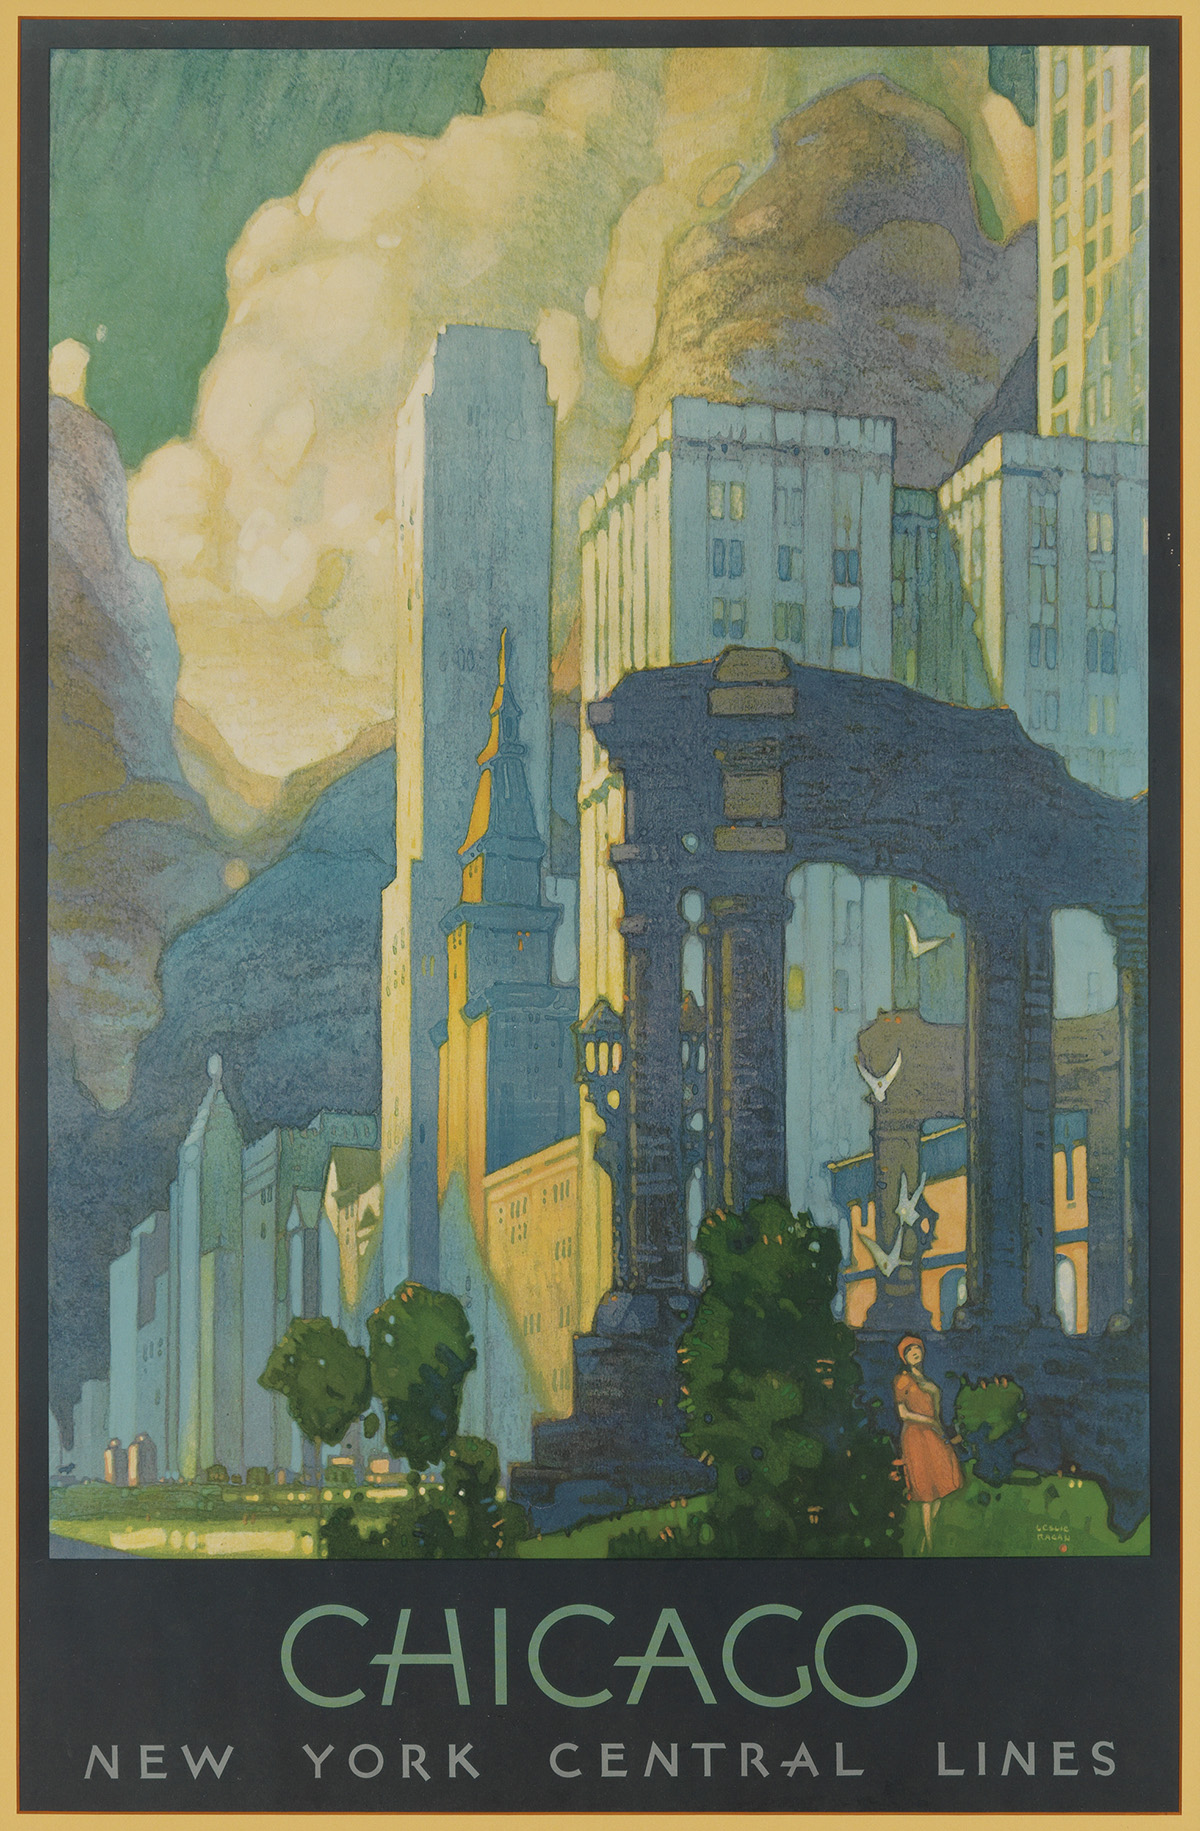 LESLIE RAGAN (1897-1972). CHICAGO / NEW YORK CENTRAL LINES. 1929. 39x25 inches, 99x64 cm. [Latham Litho. & Ptg. Co., Long Island City.]